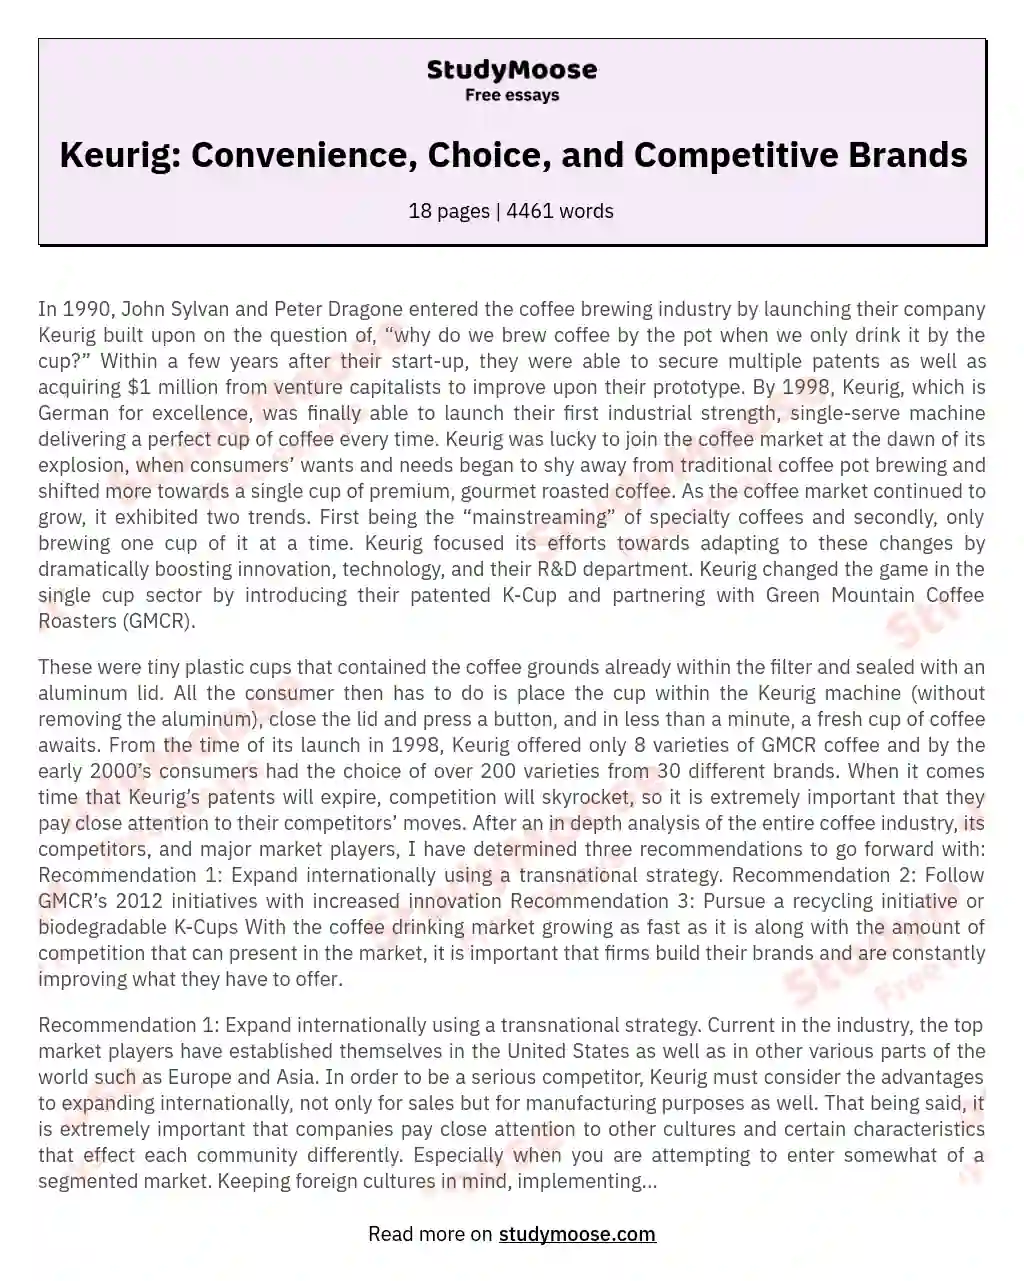 Keurig: Convenience, Choice, and Competitive Brands essay